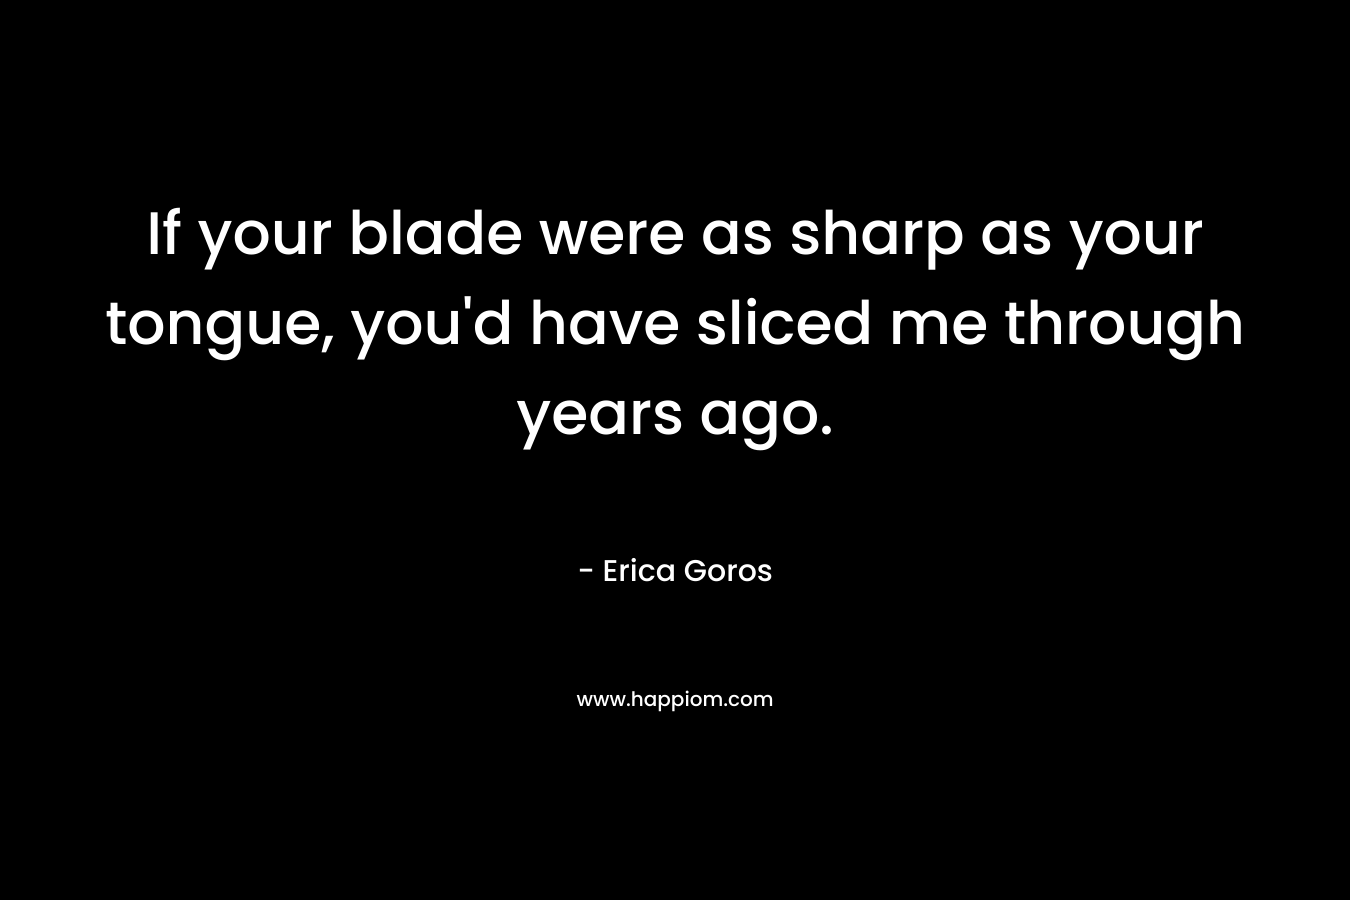 If your blade were as sharp as your tongue, you'd have sliced me through years ago.